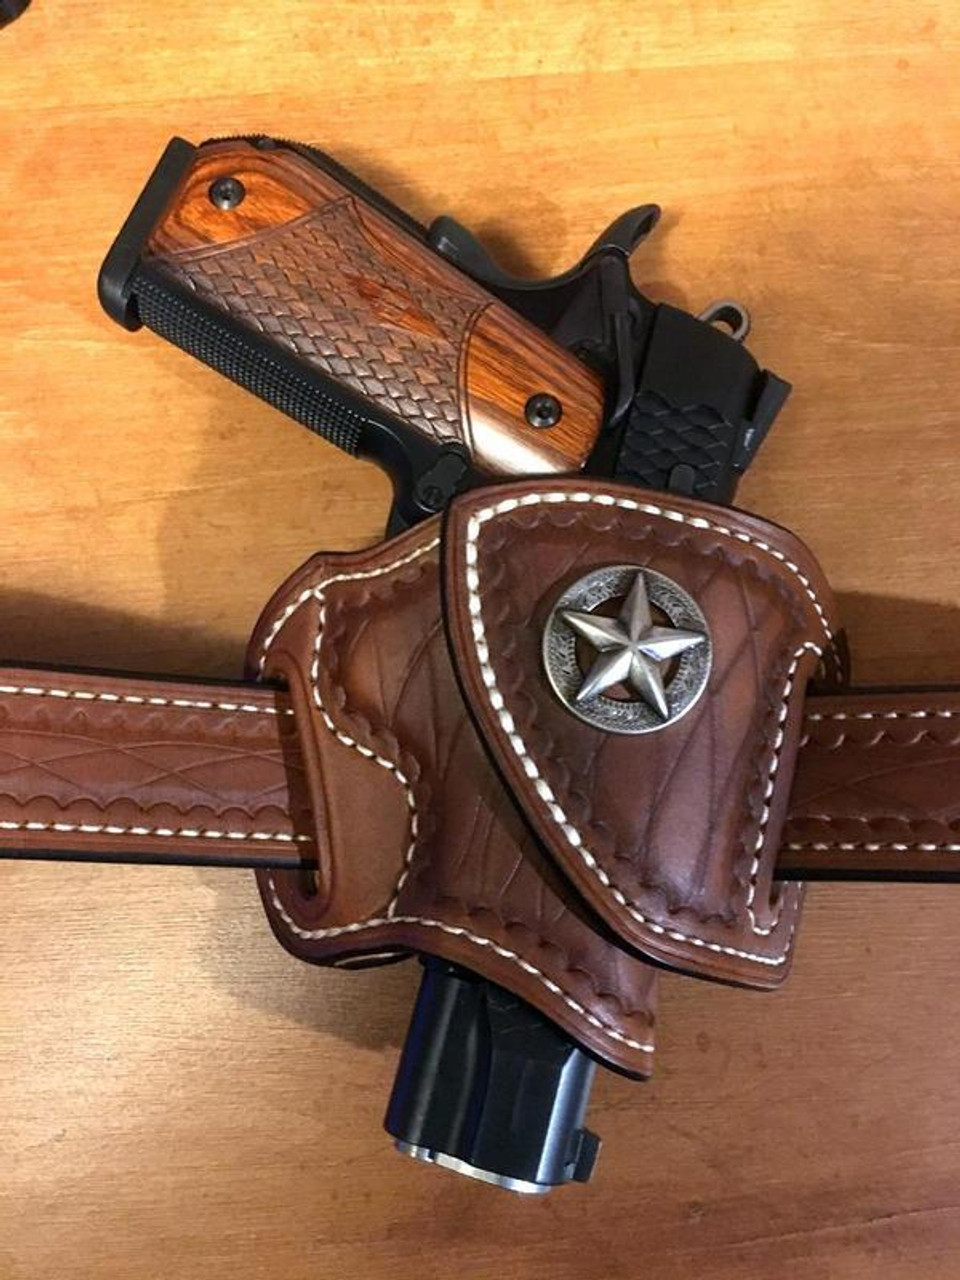 Quick Draw OWB Belt Clip Leather Holster - Maxx Carry